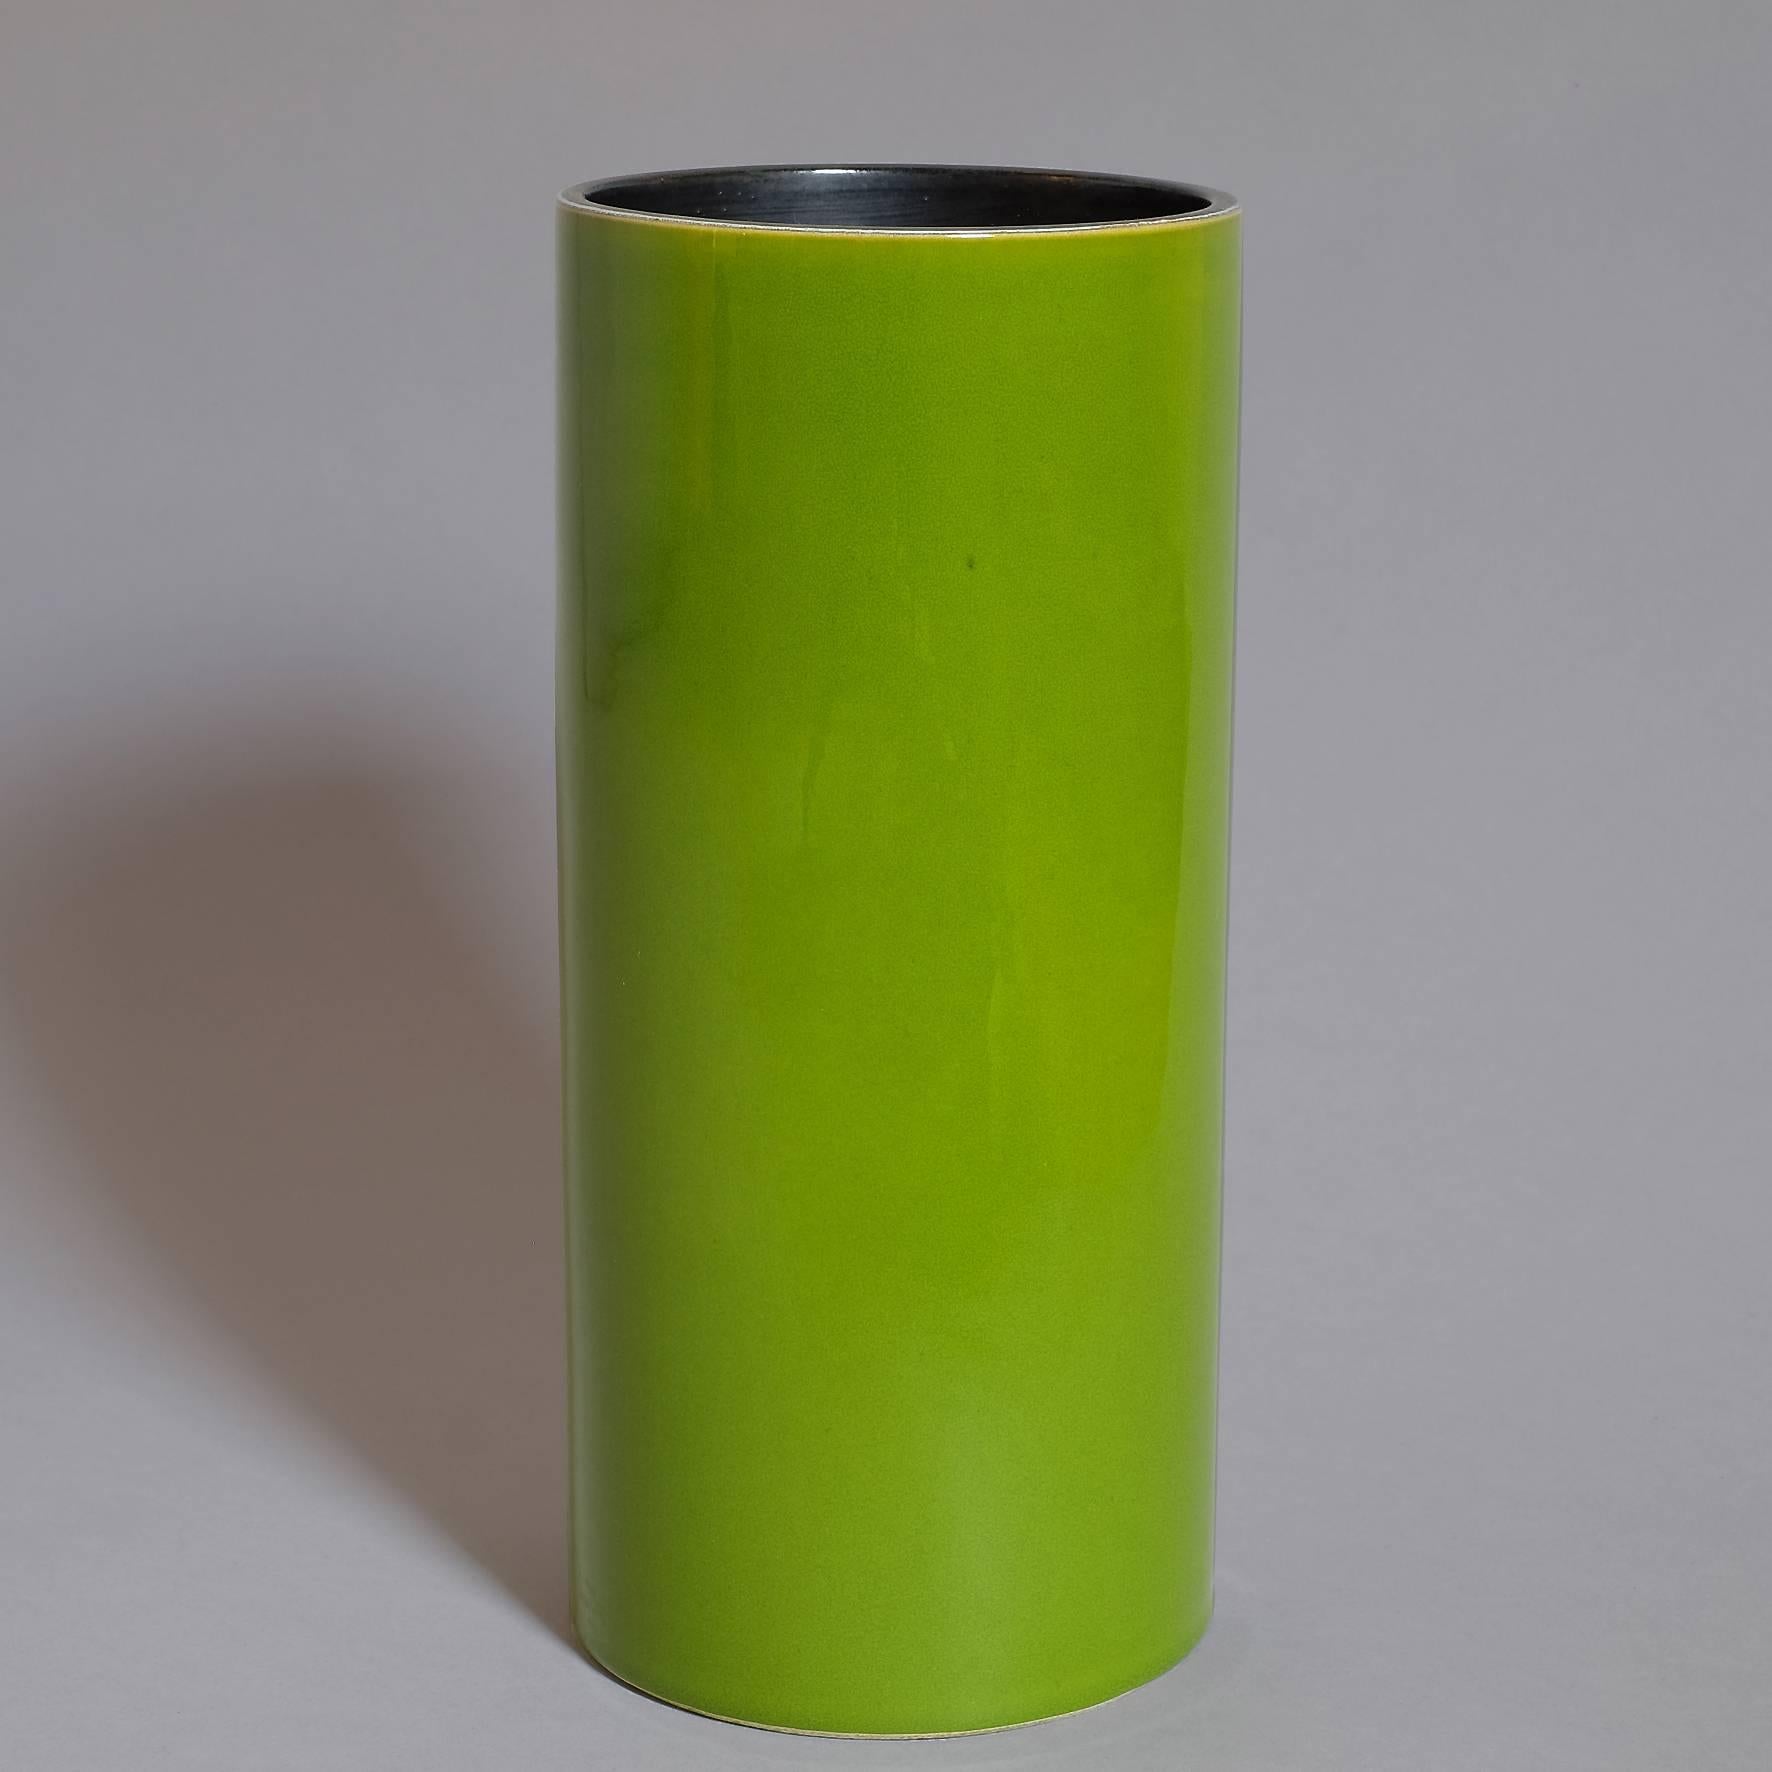 A green glazed ceramic cylindrical vase with a black covered interior.
Signed underneath "Jouve" and artist's cypher "Alpha".